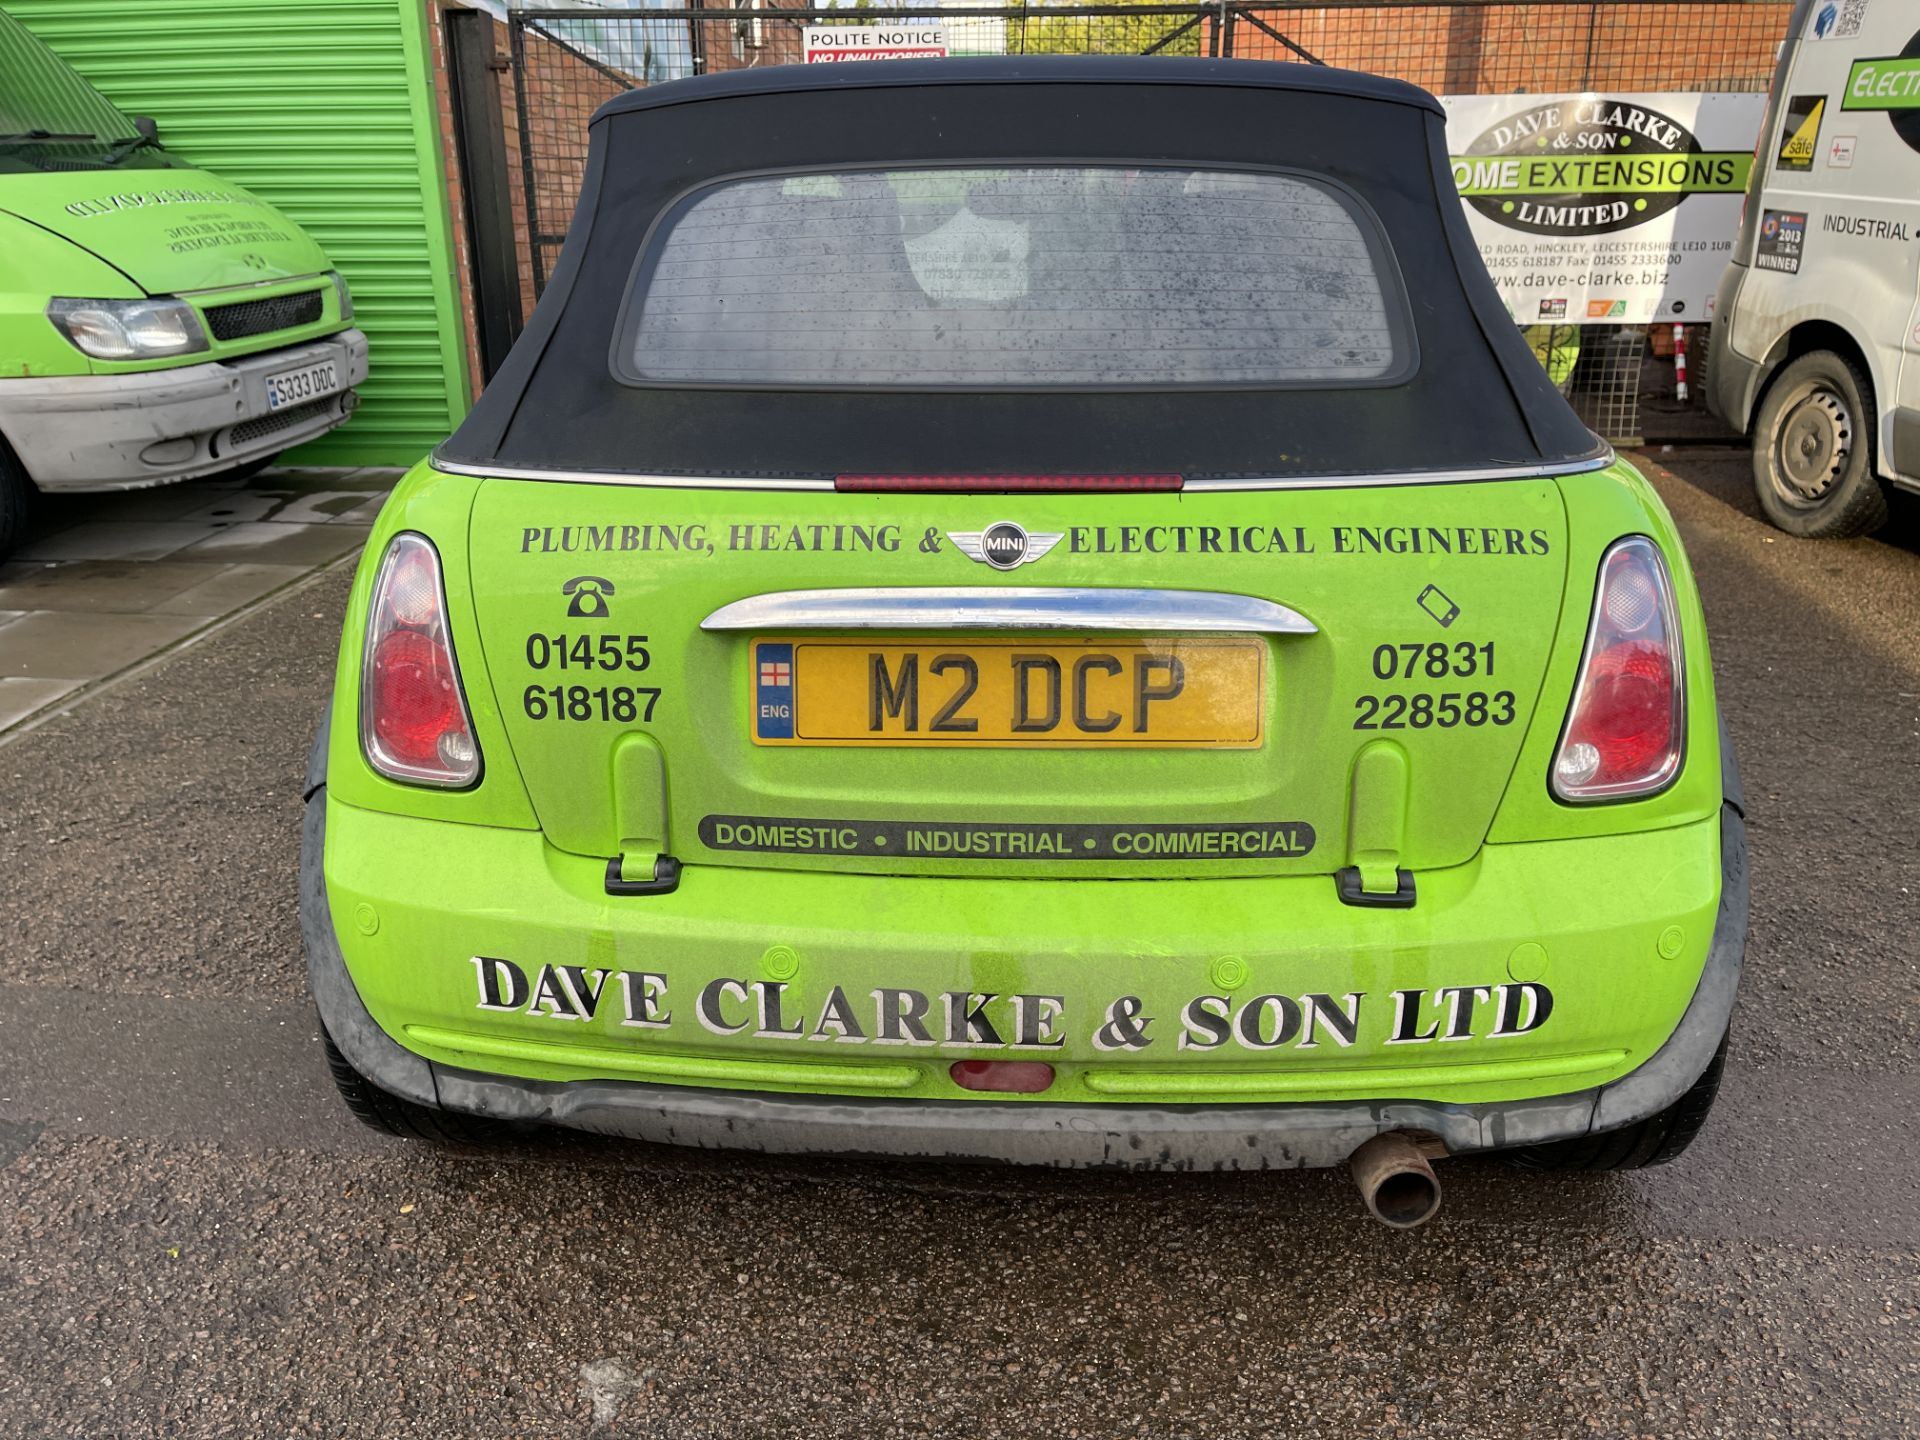 Mini Cooper 1,598cc Petrol, 5 Speed Manual Convertible, Registration No. M2DCP, First Plate GF06 OYH - Image 7 of 24